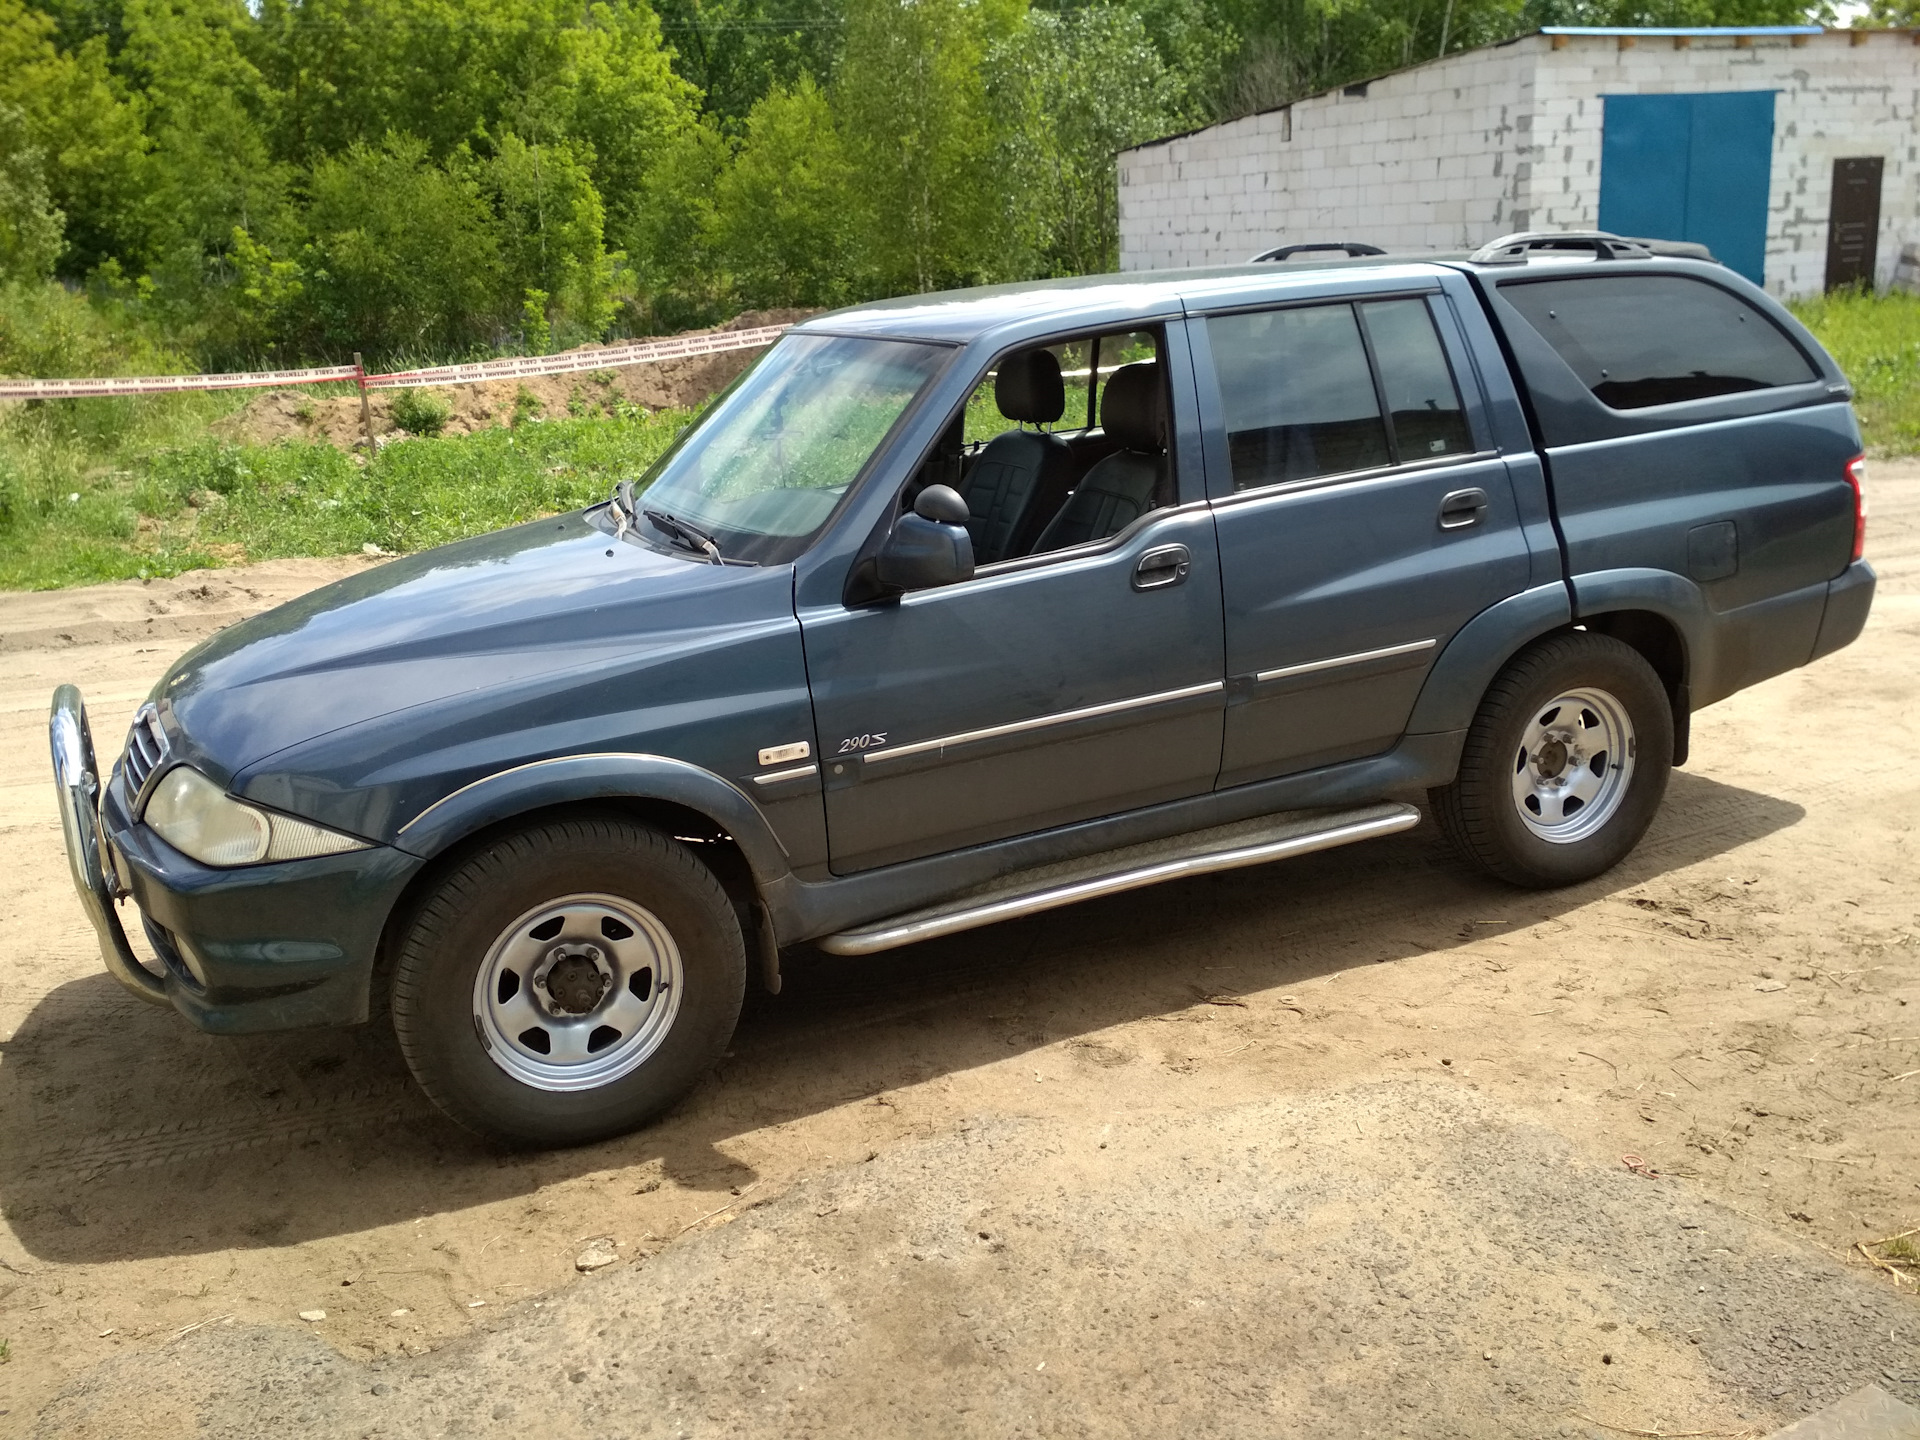 Ssangyong musso sports. SSANGYONG Musso 2004. Санг енг Муссо спорт 2.9 дизель. Салон SSANGYONG Musso Sports.